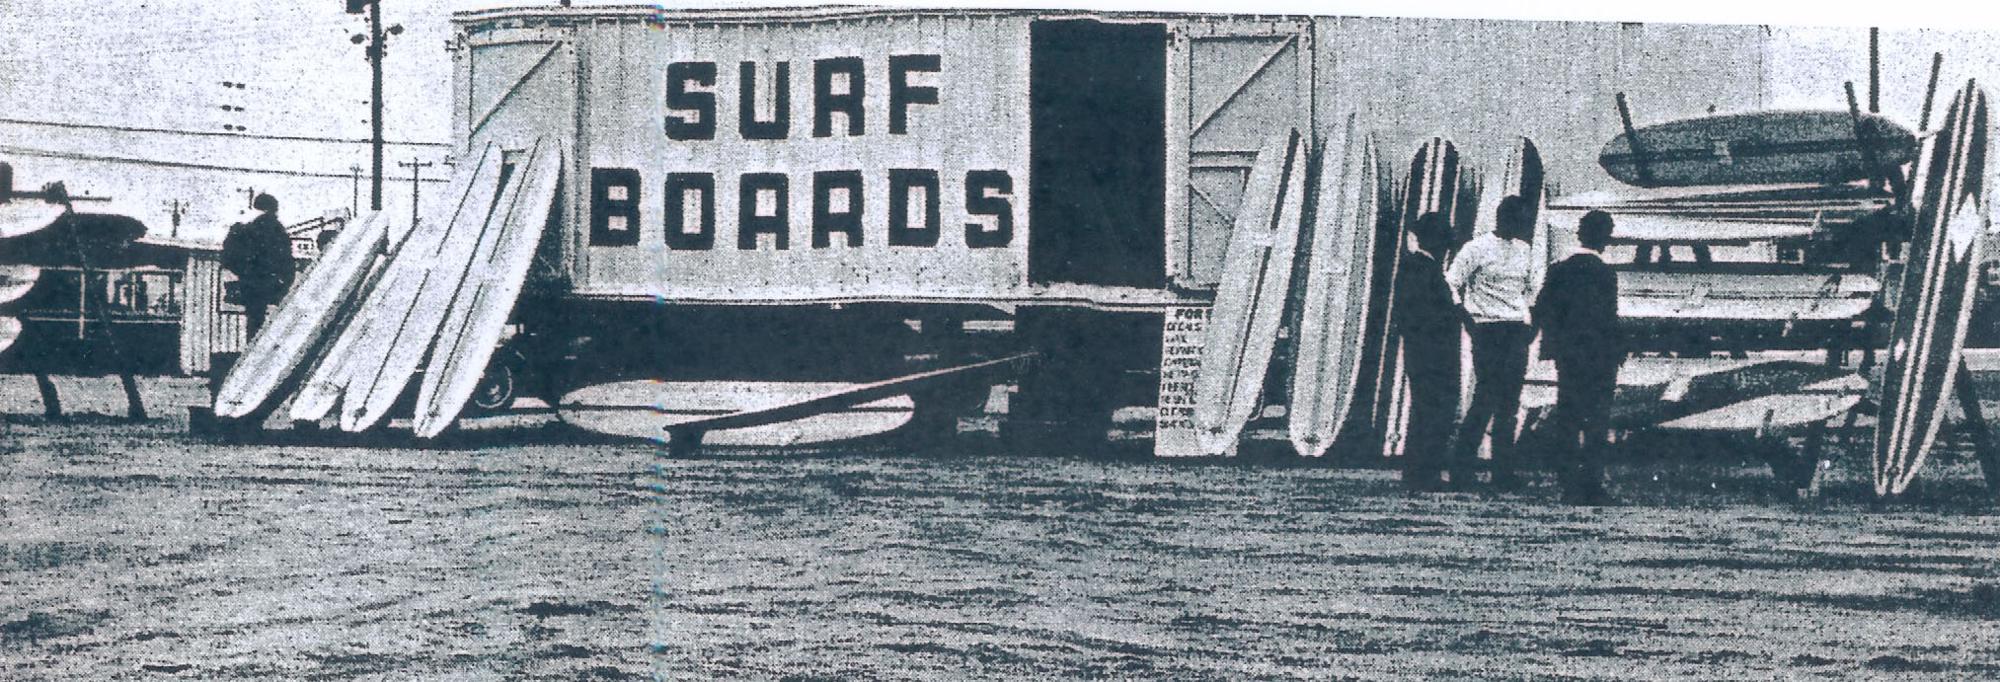 It all started with a surfboard back in 1959...